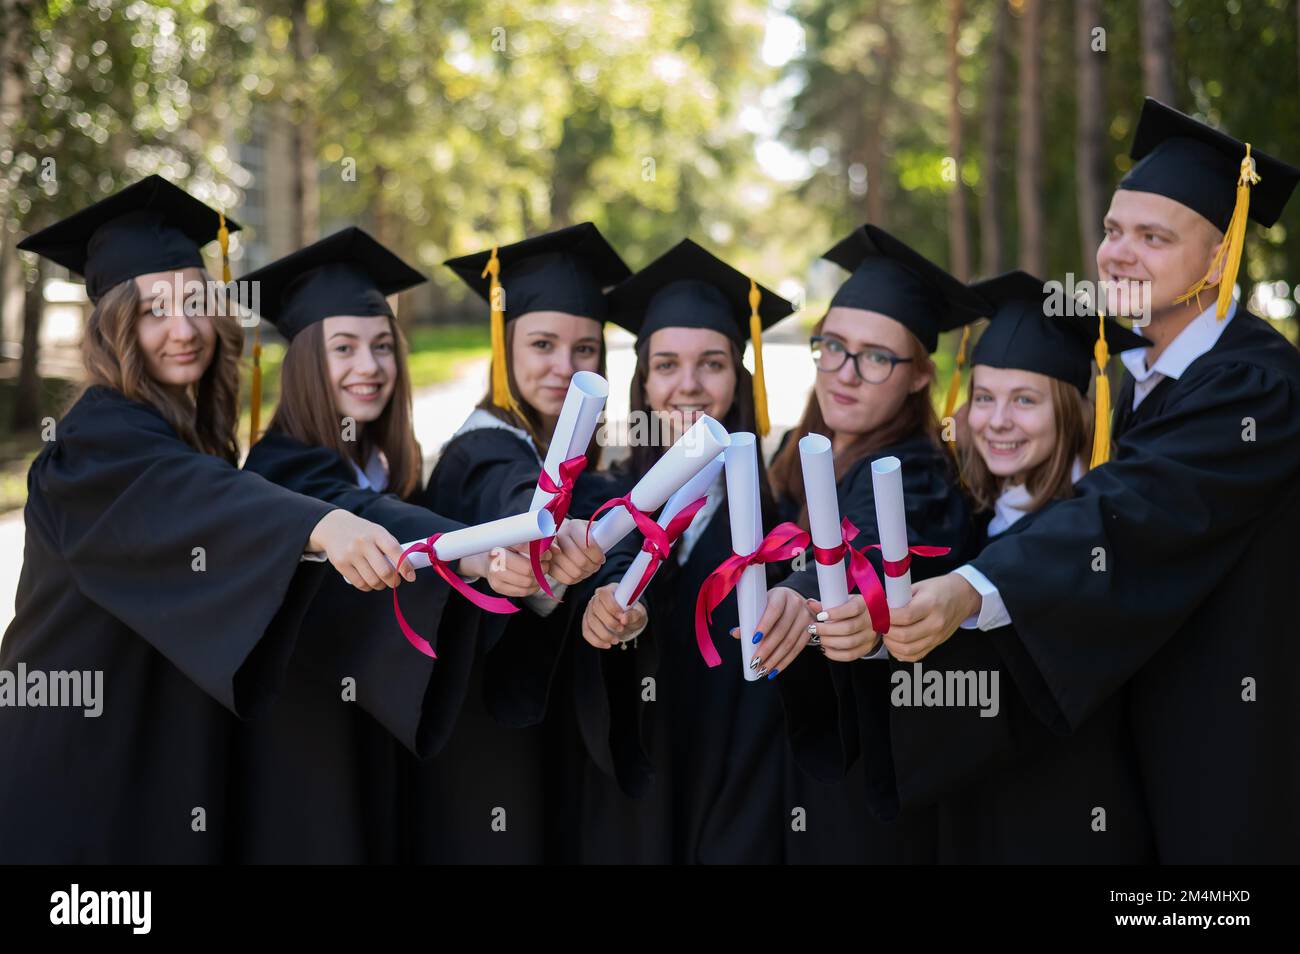 Row of happy young people in graduation gowns holding diplomas outdoors.  Stock Photo